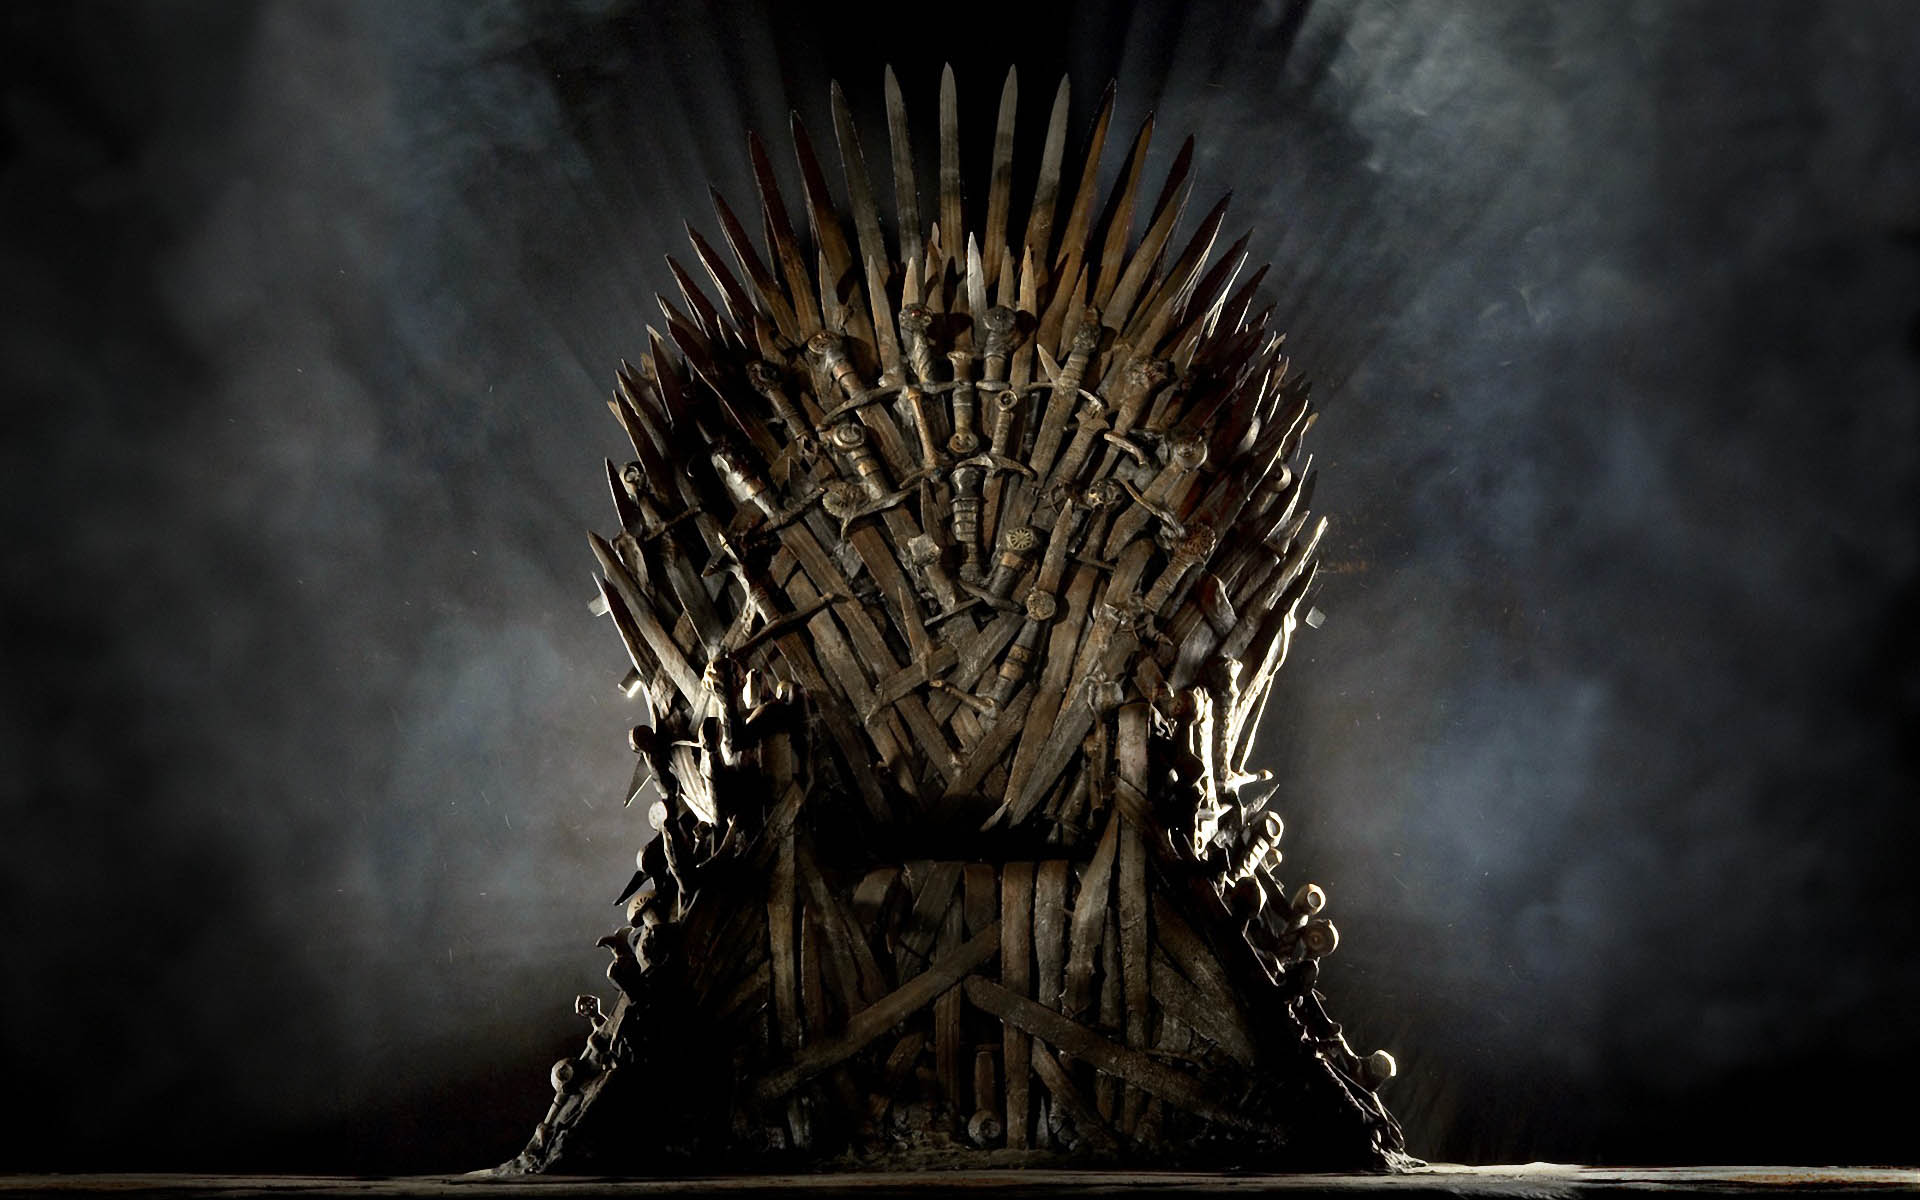 Does Game Of Thrones Reflect Real World Leadership?